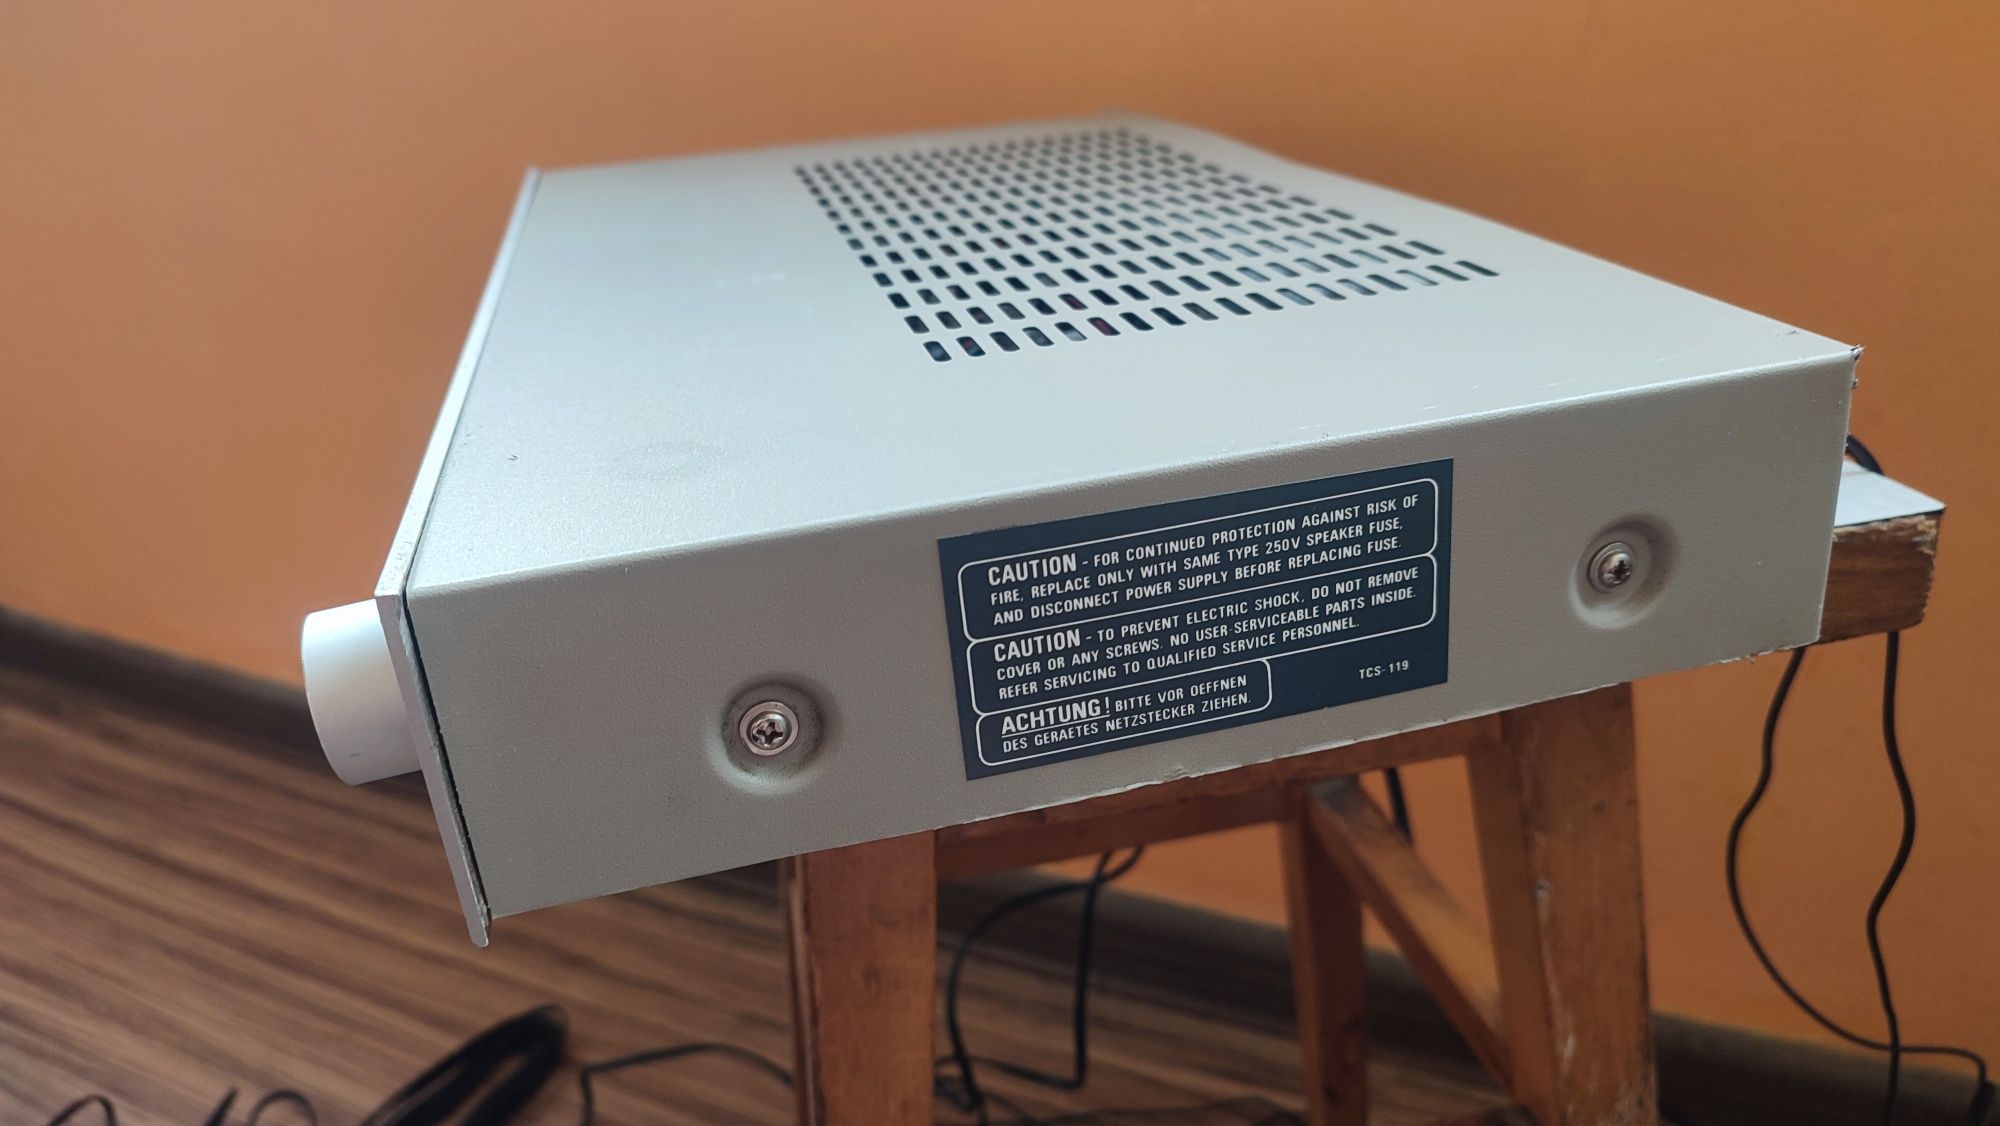 Rotel RA-820 Stereo Integrated Amplifier